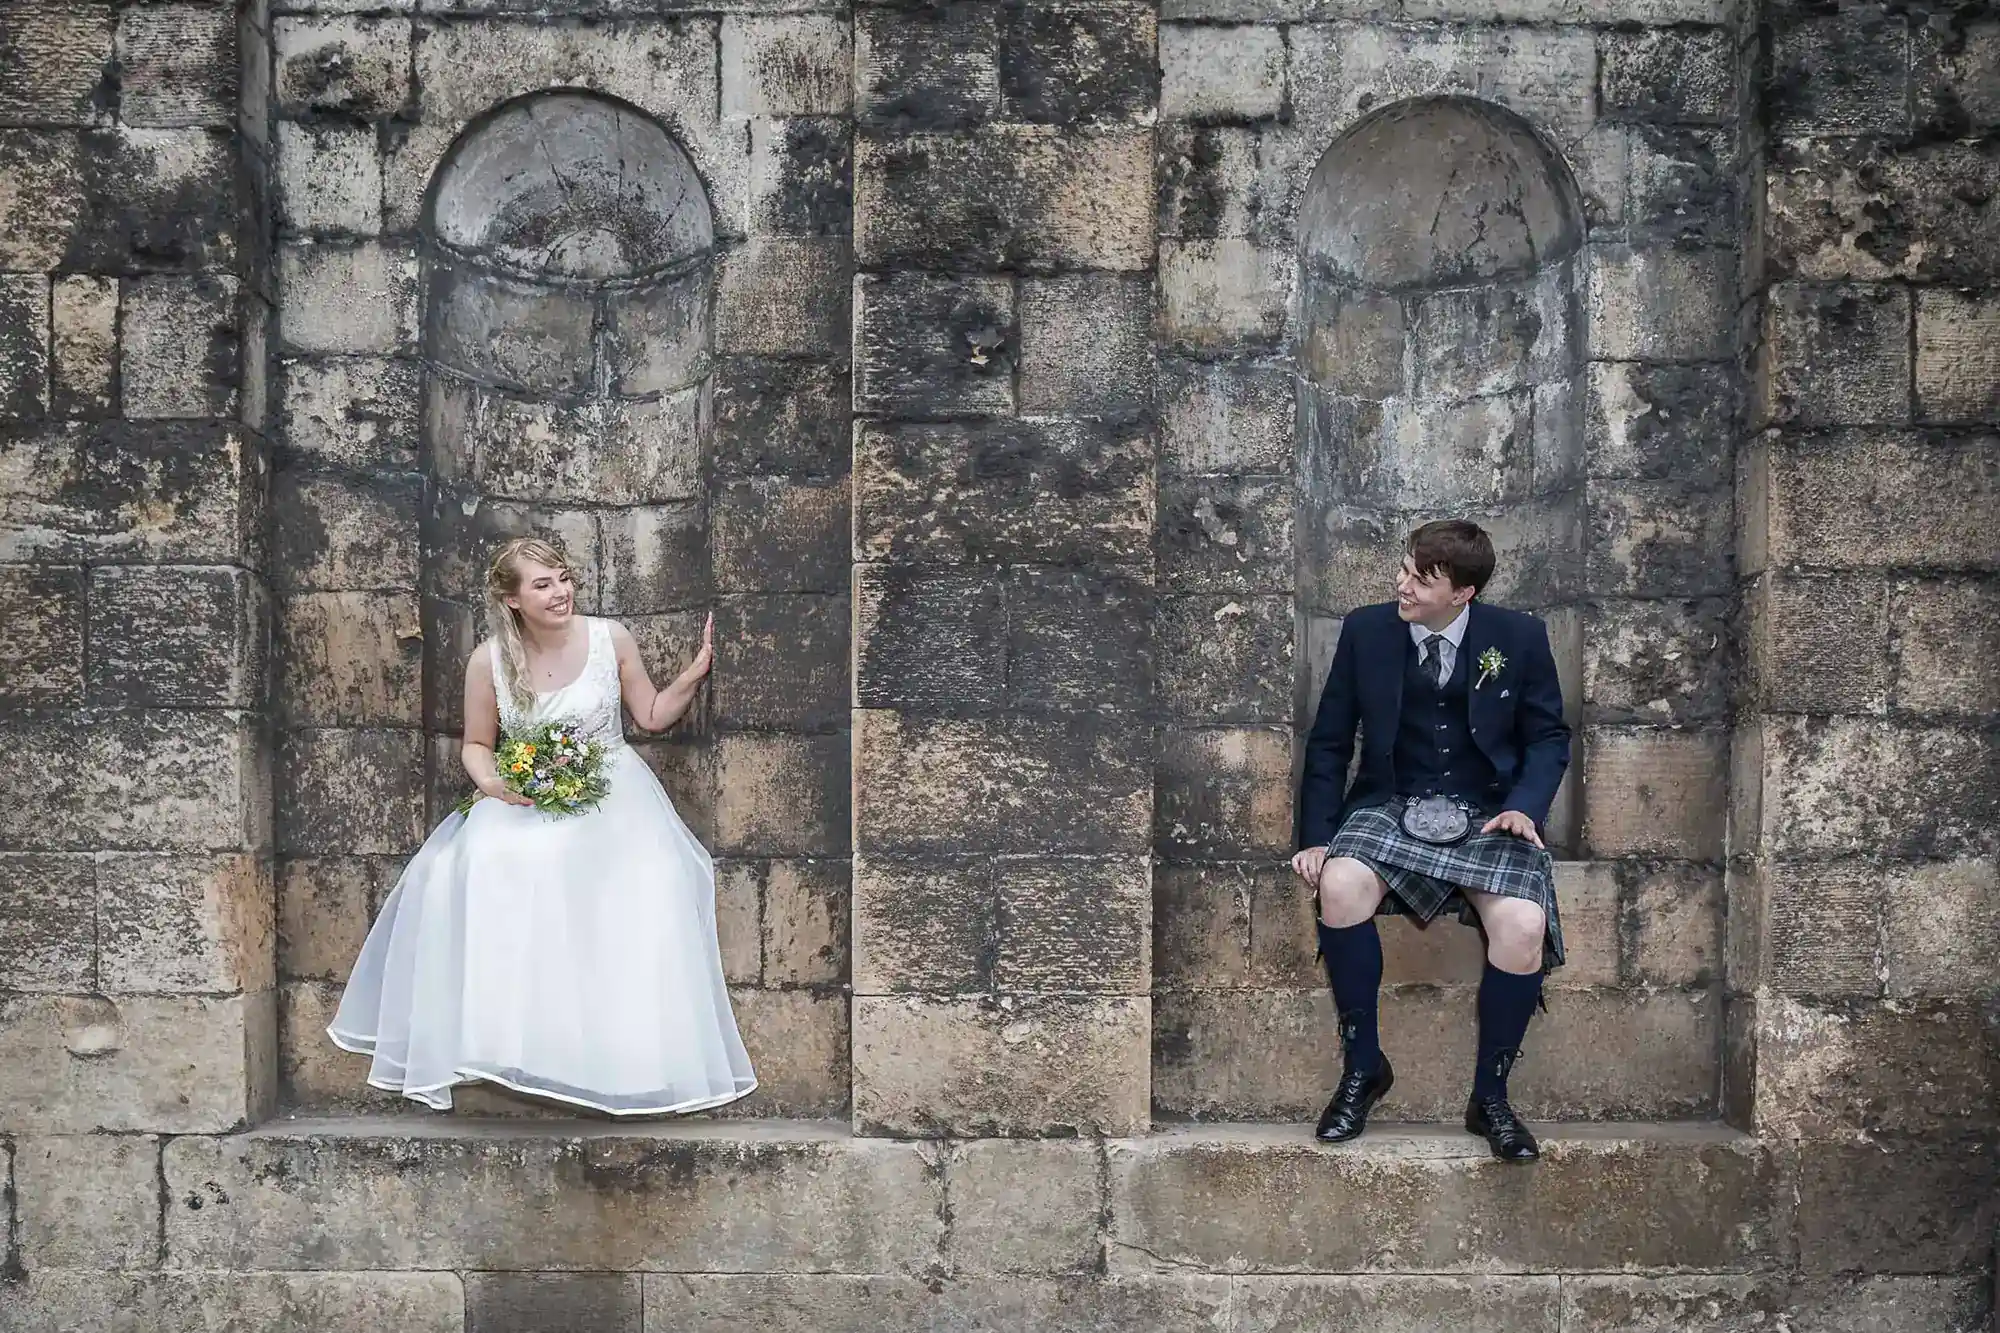 Bride in a white dress and groom in a kilt sitting apart on ledges against an old stone wall, looking at each other - Wedding-photography prices in Scotland